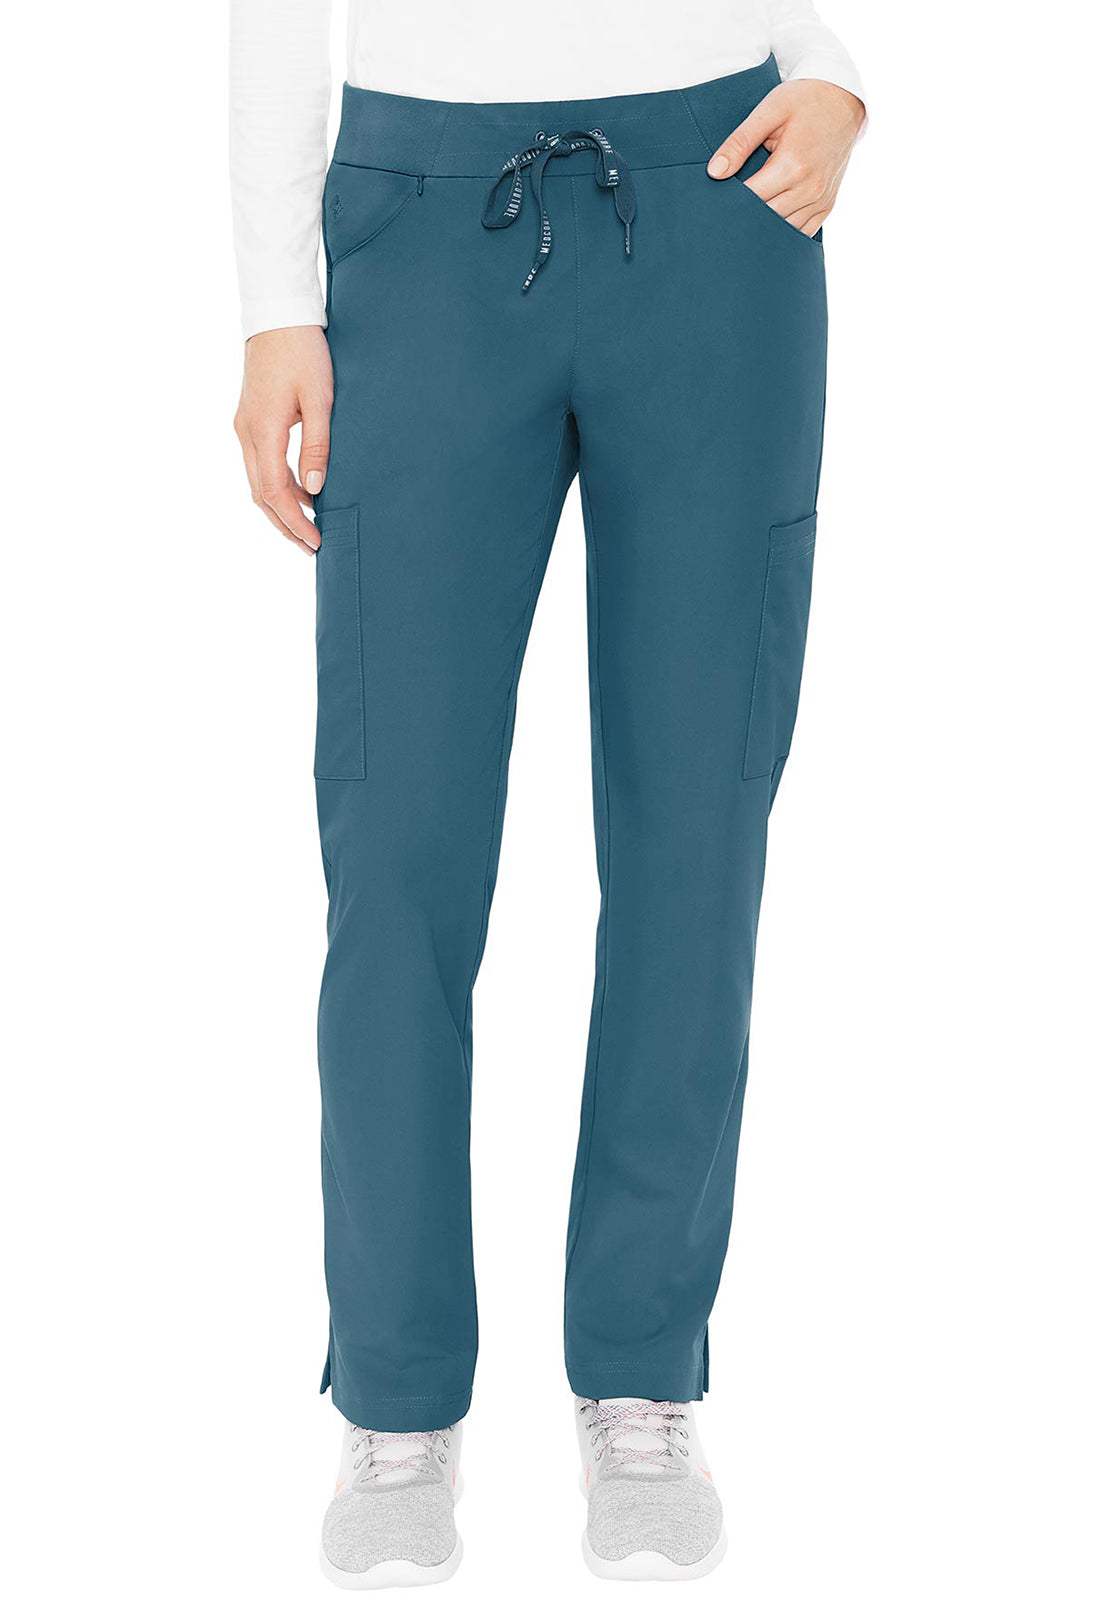 Clearance Med Couture Peaches Tall Scoop Pocket Pants